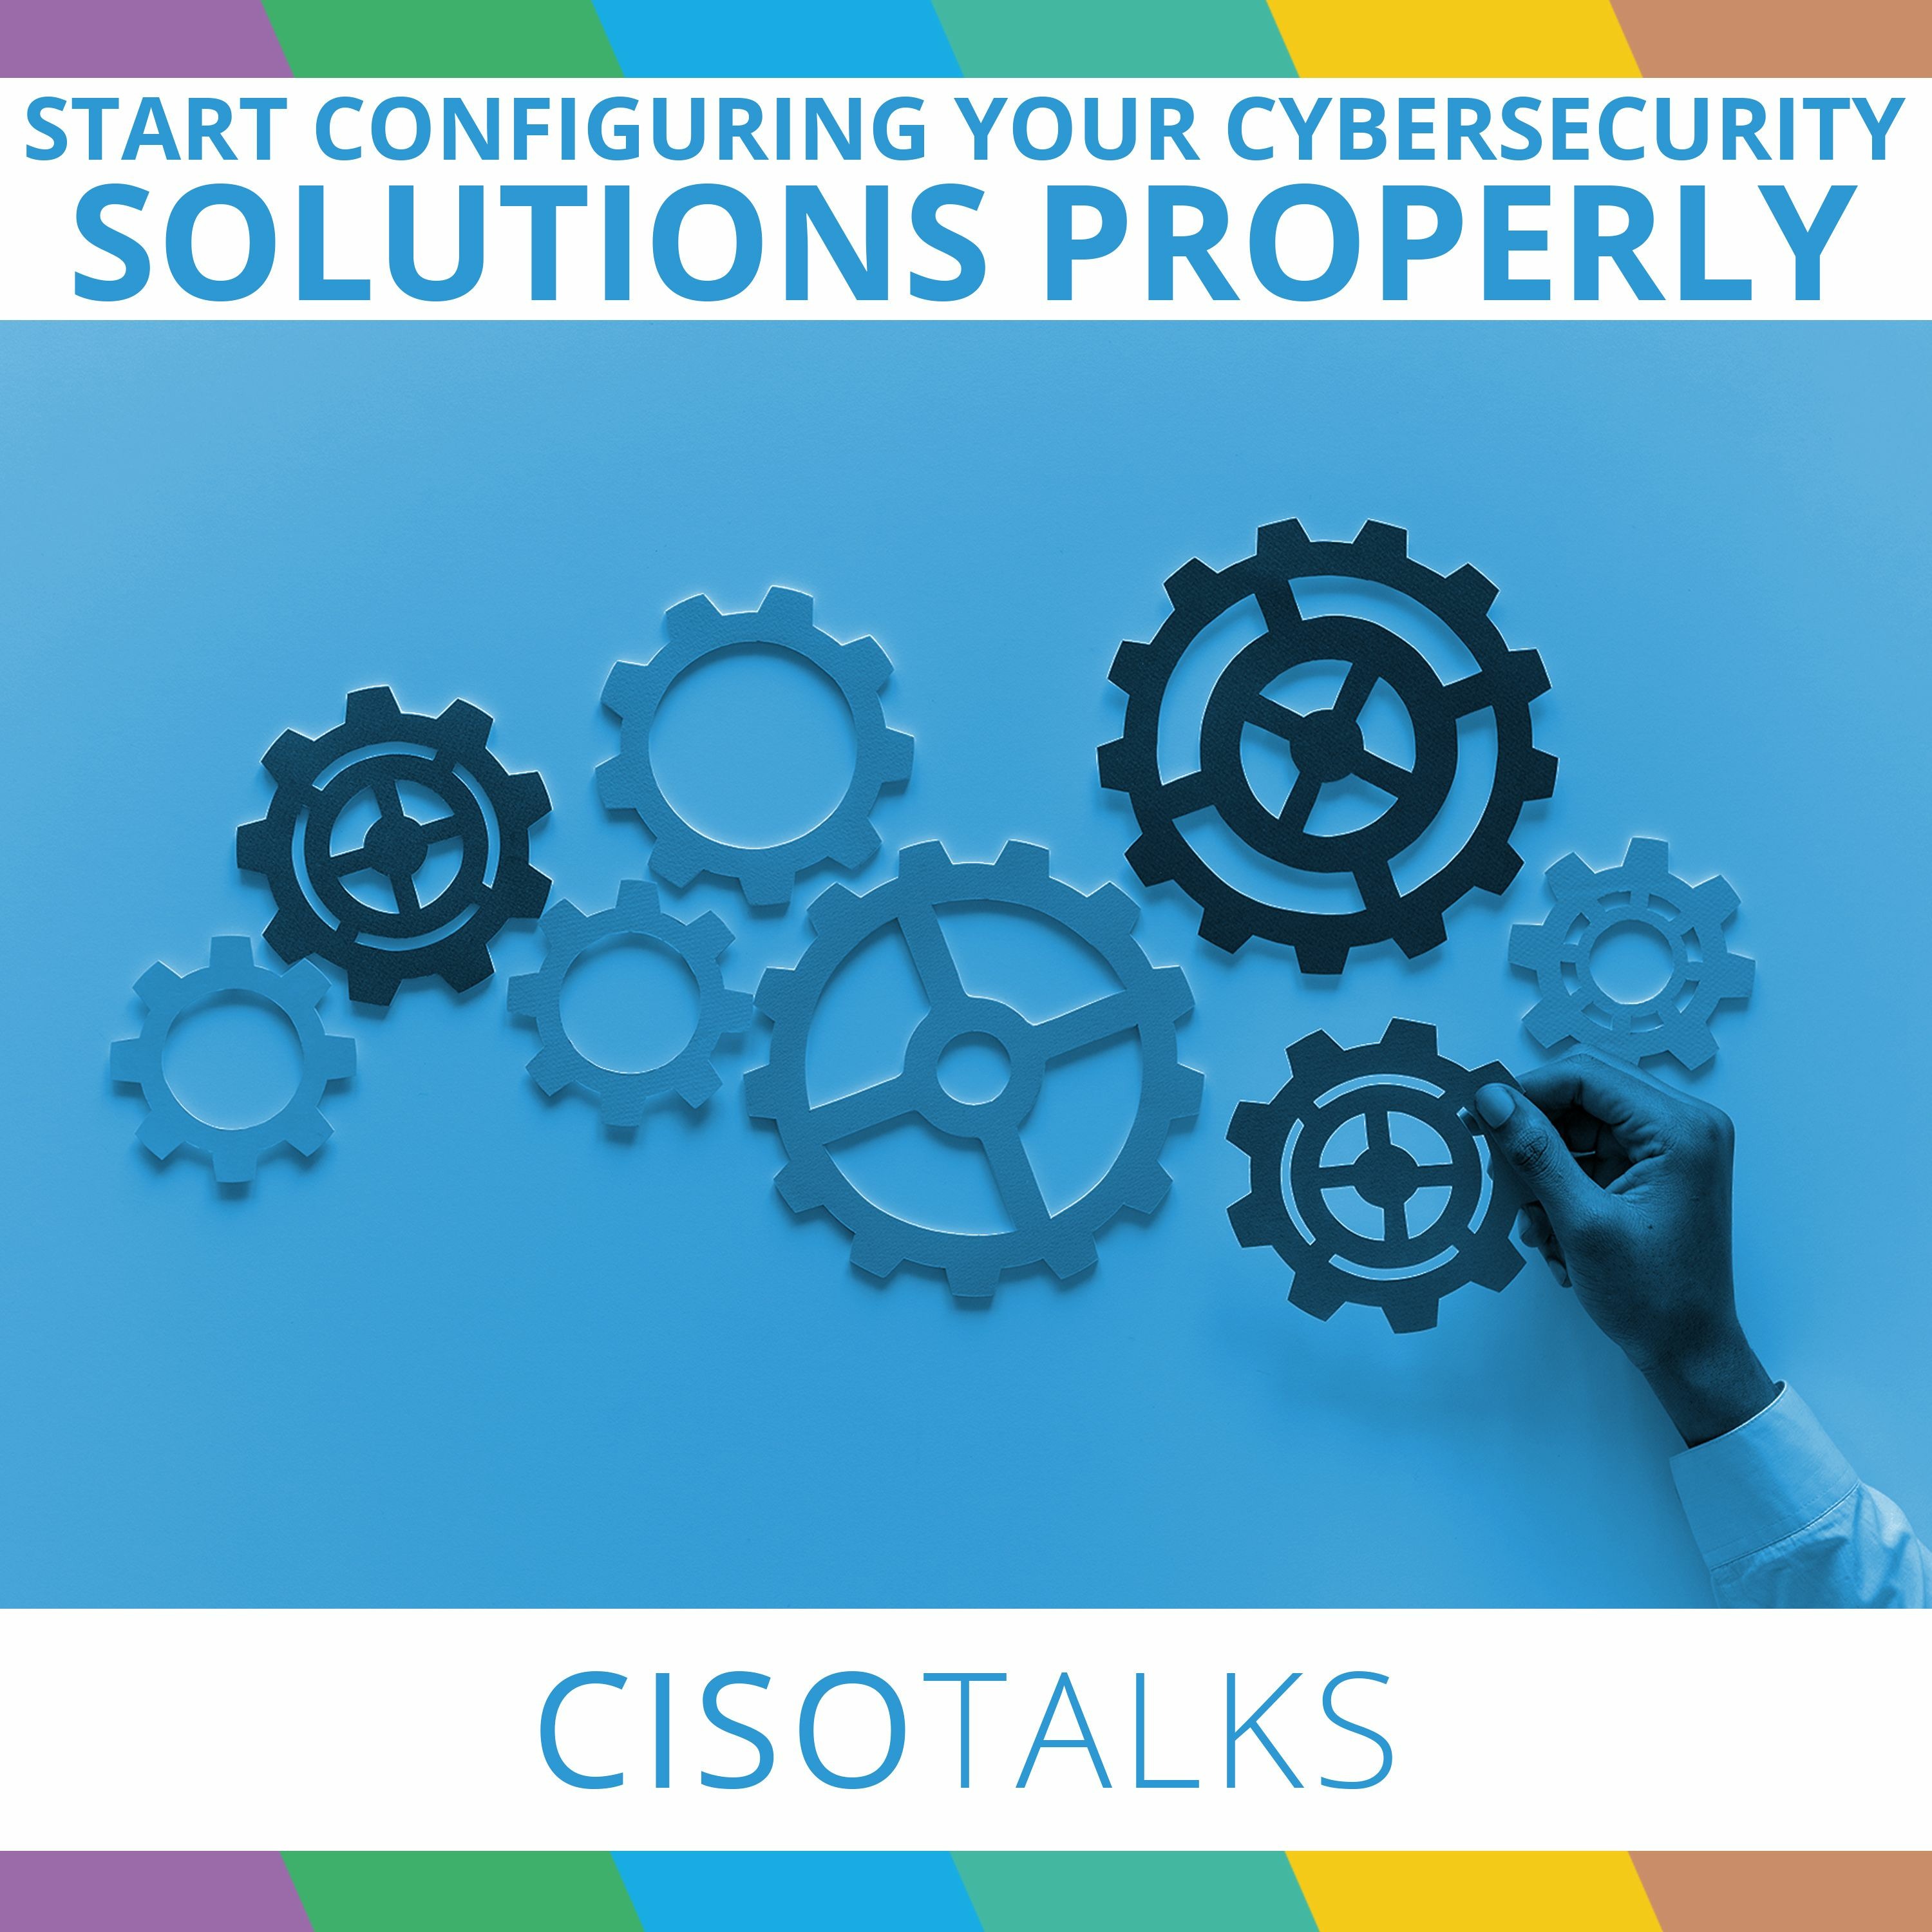 Start configuring your cybersecurity solutions properly | CISO Talks